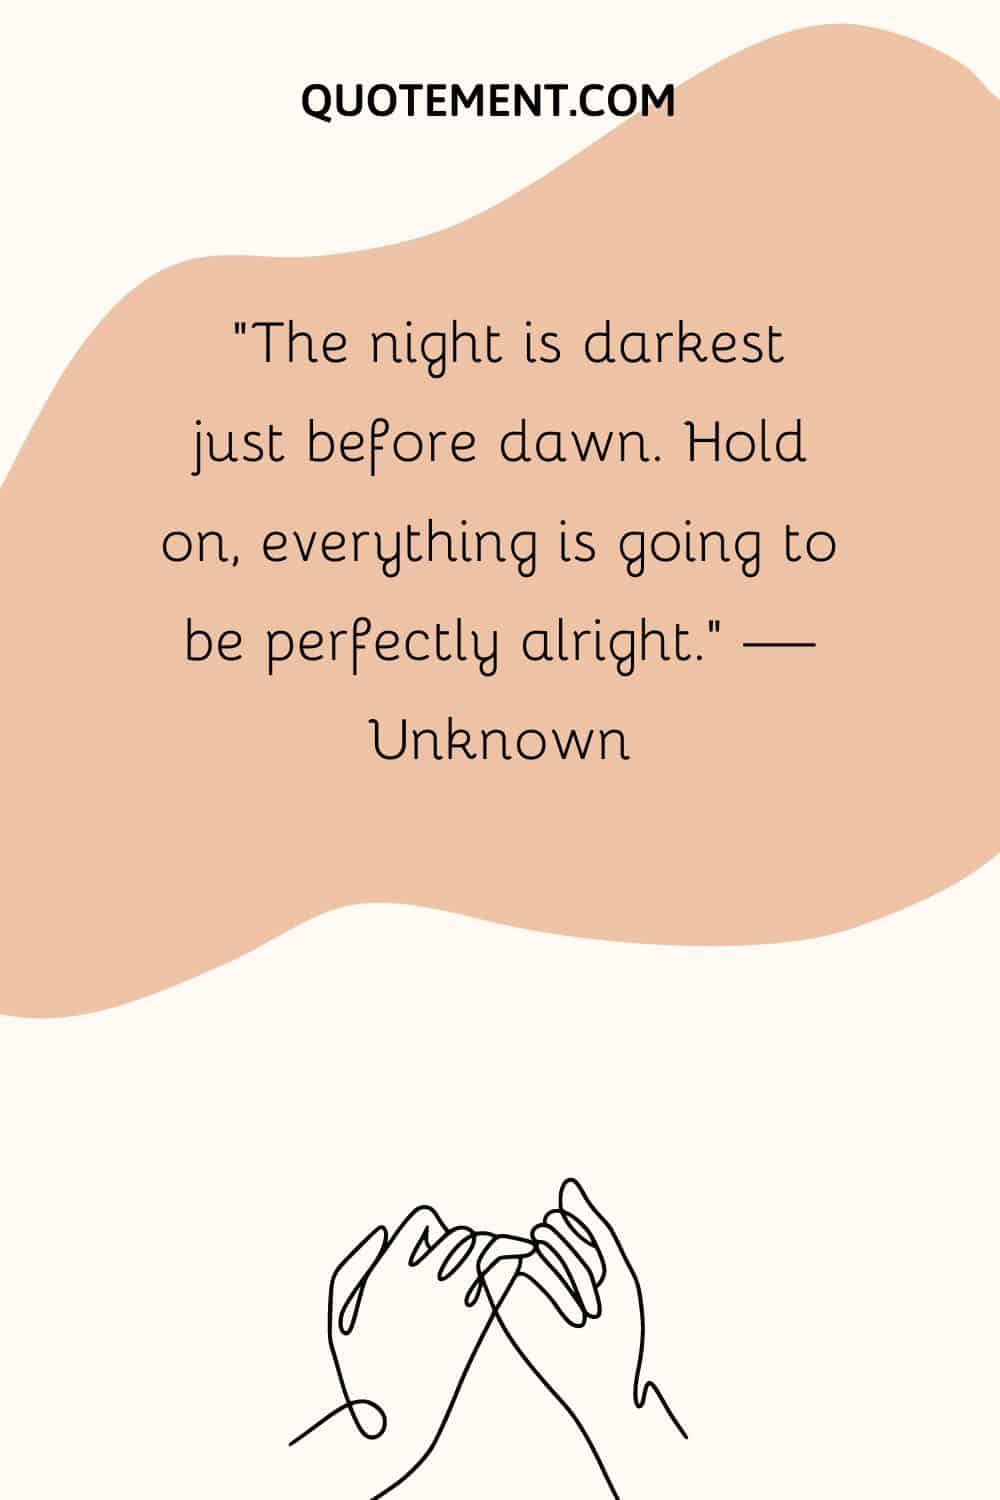 “The night is darkest just before dawn. Hold on, everything is going to be perfectly alright.” — Unknown